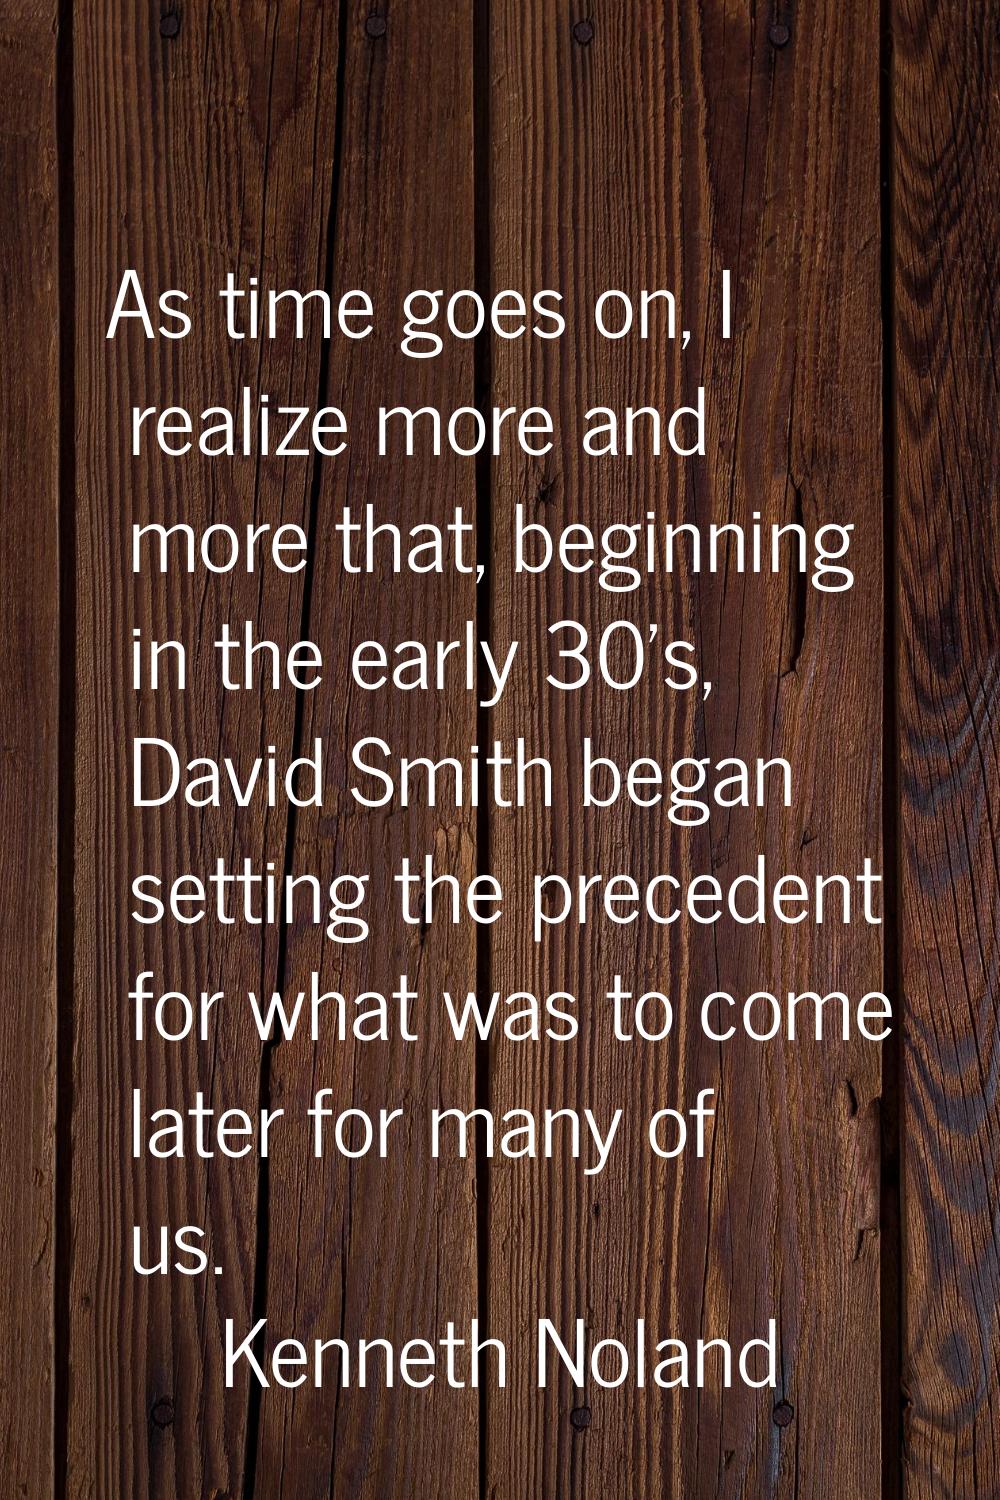 As time goes on, I realize more and more that, beginning in the early 30's, David Smith began setti